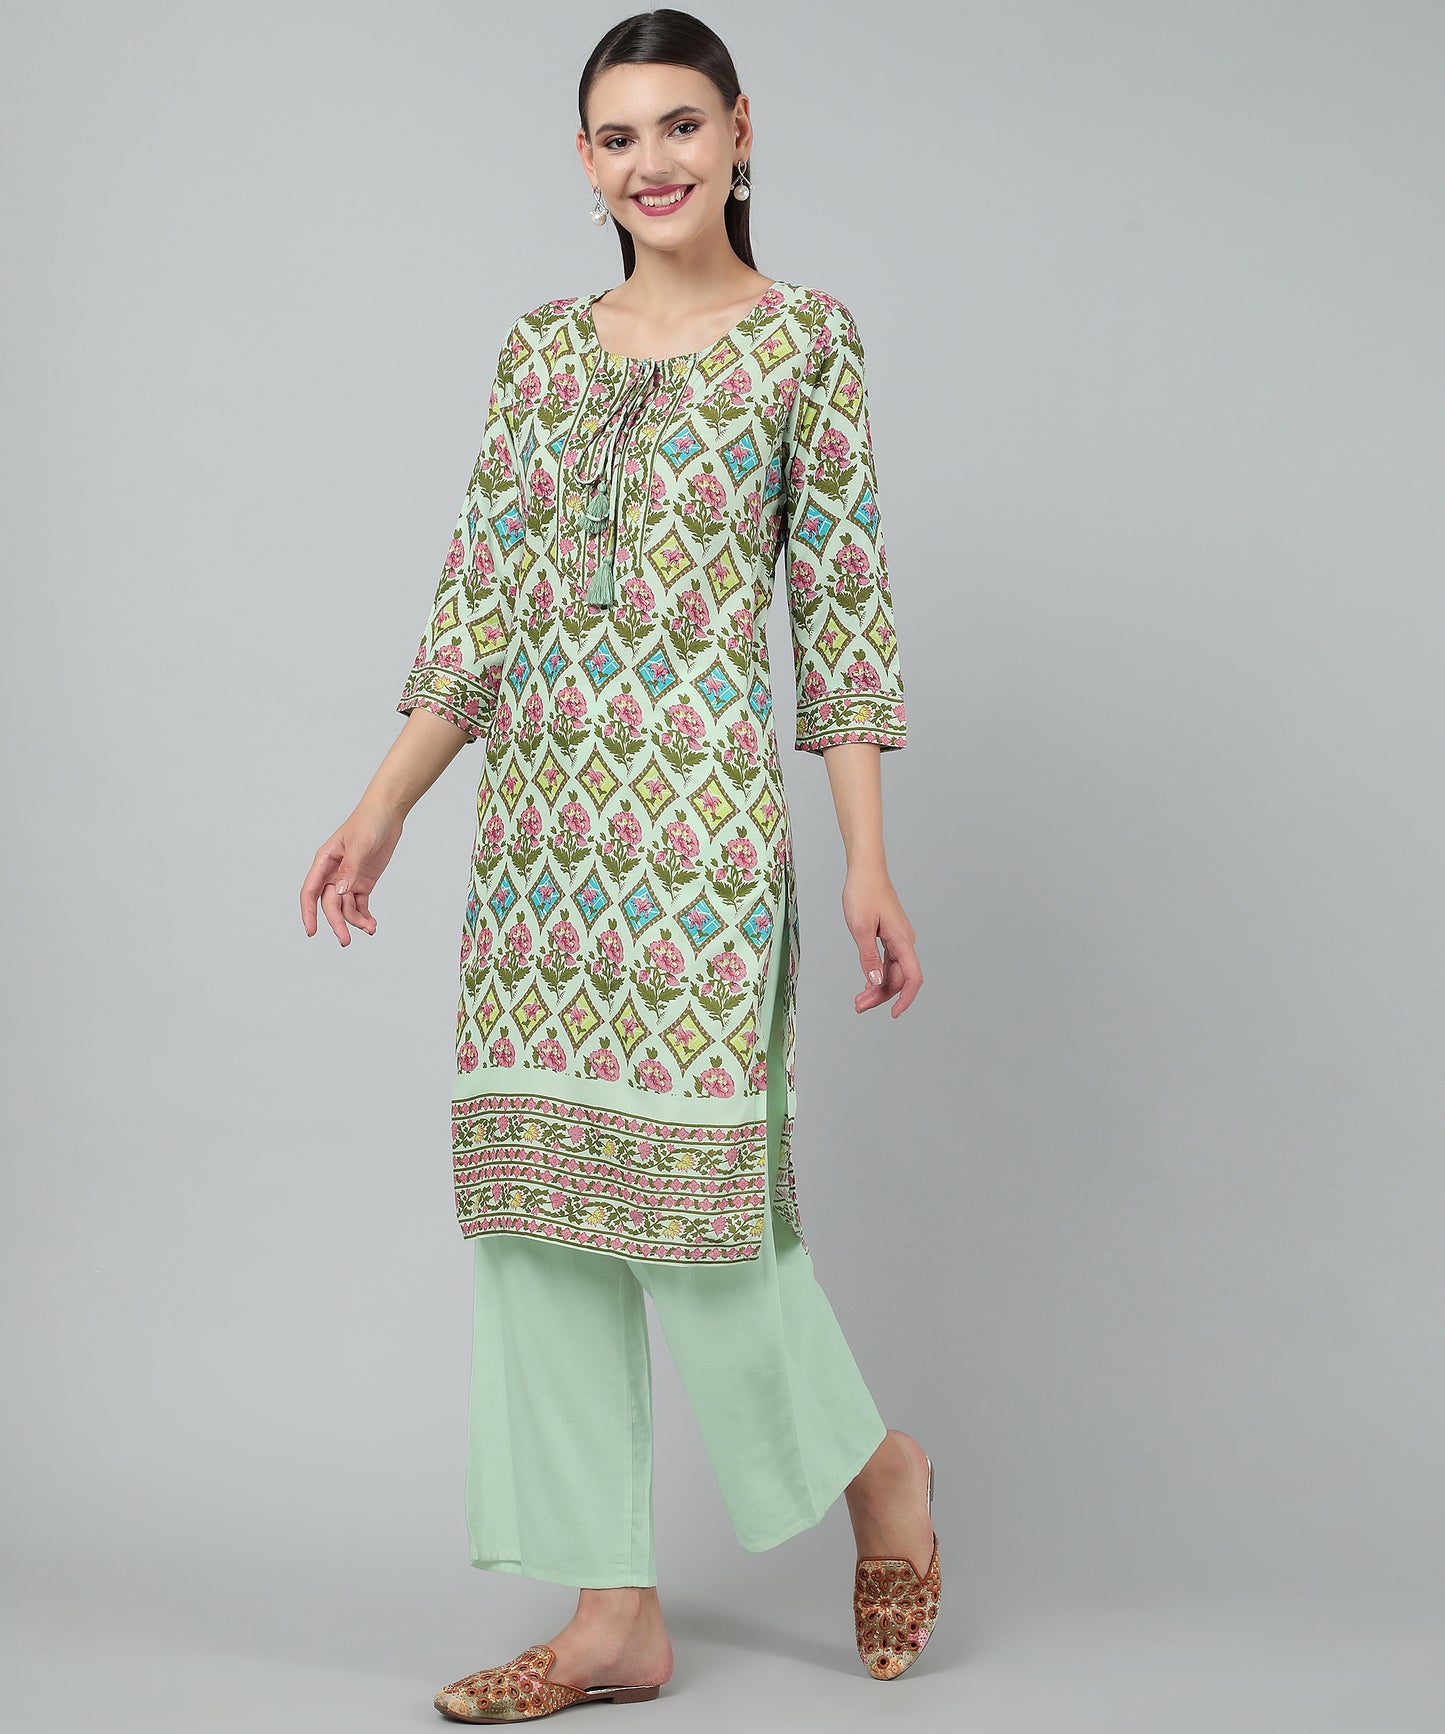 Pritned Rayon Cotton Kurti with Keyhole Neck Tassels and Drawstring,Green